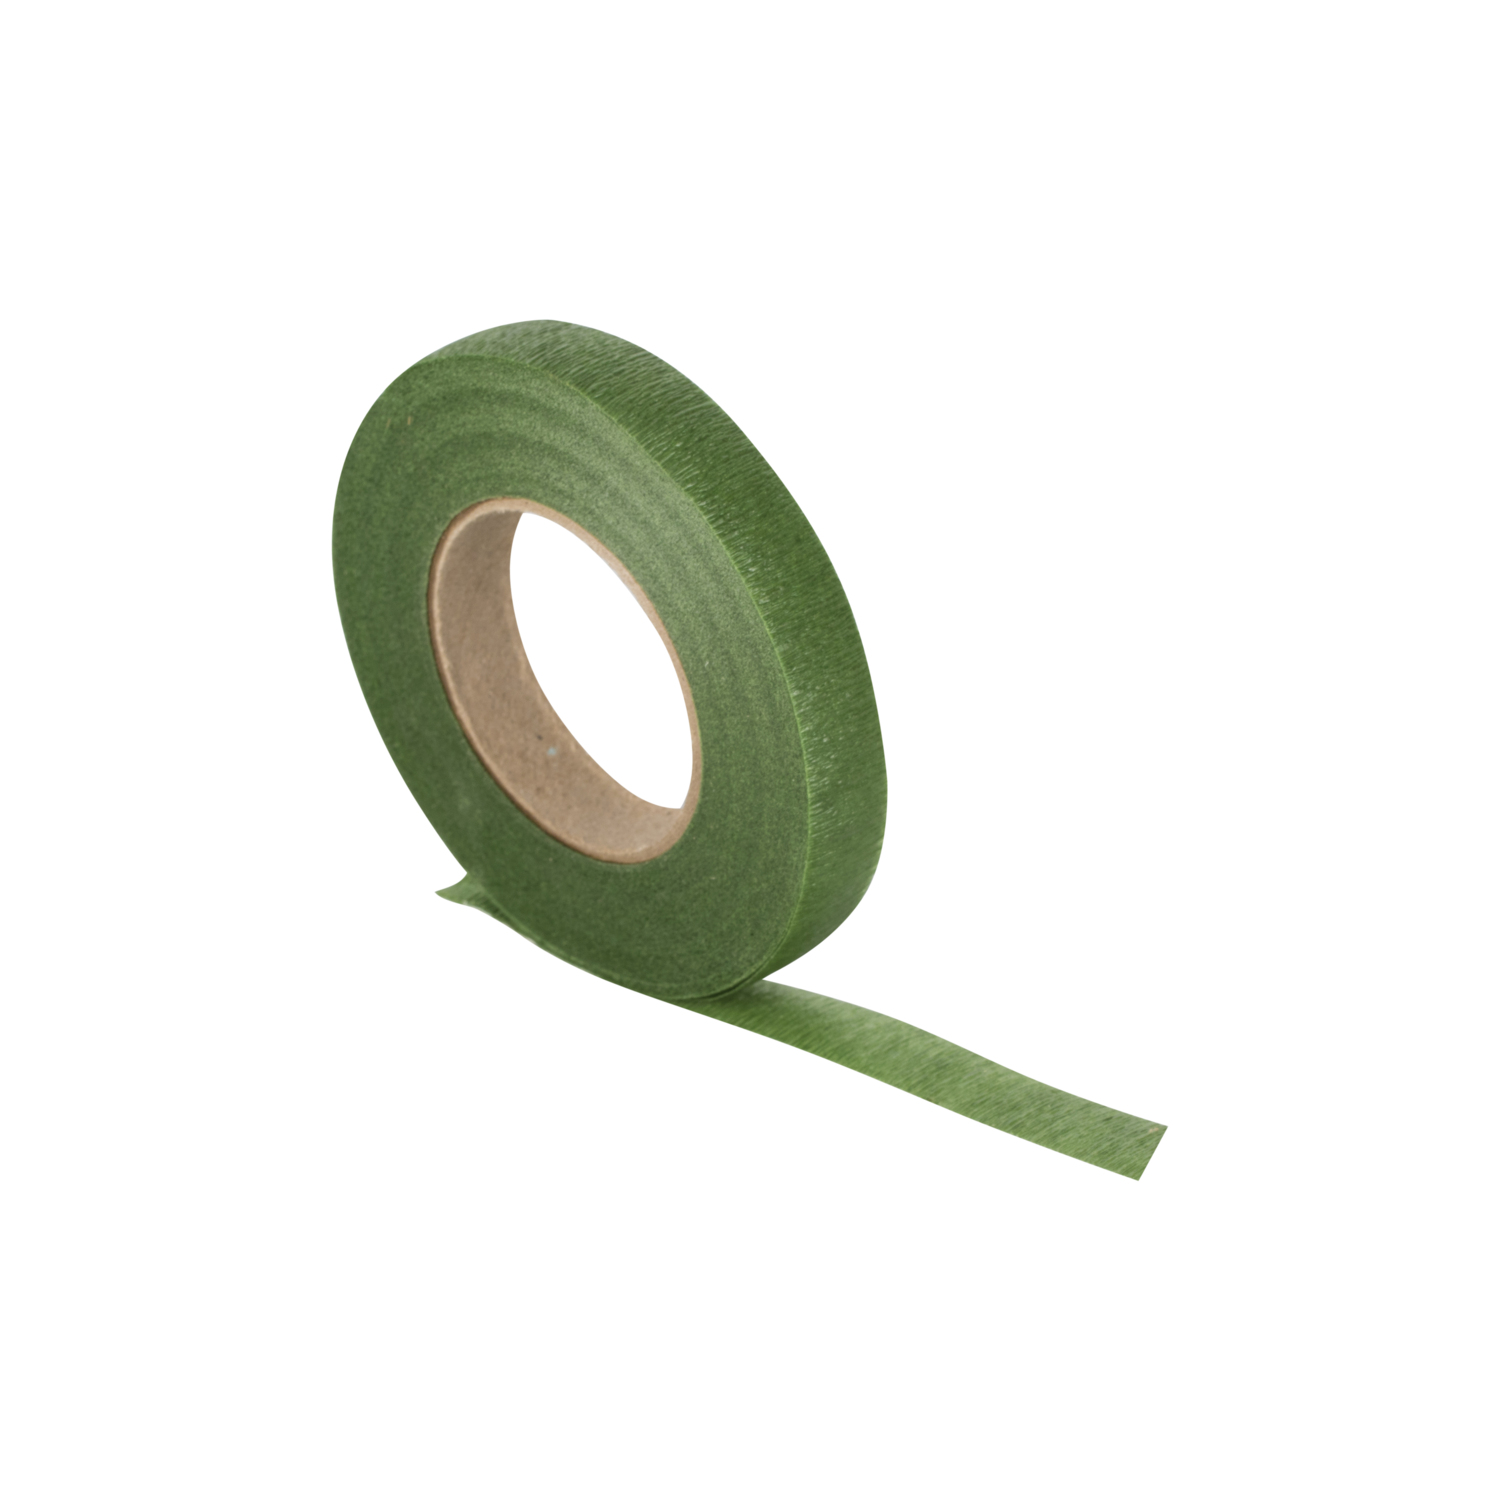 Floral Tape - Green Image